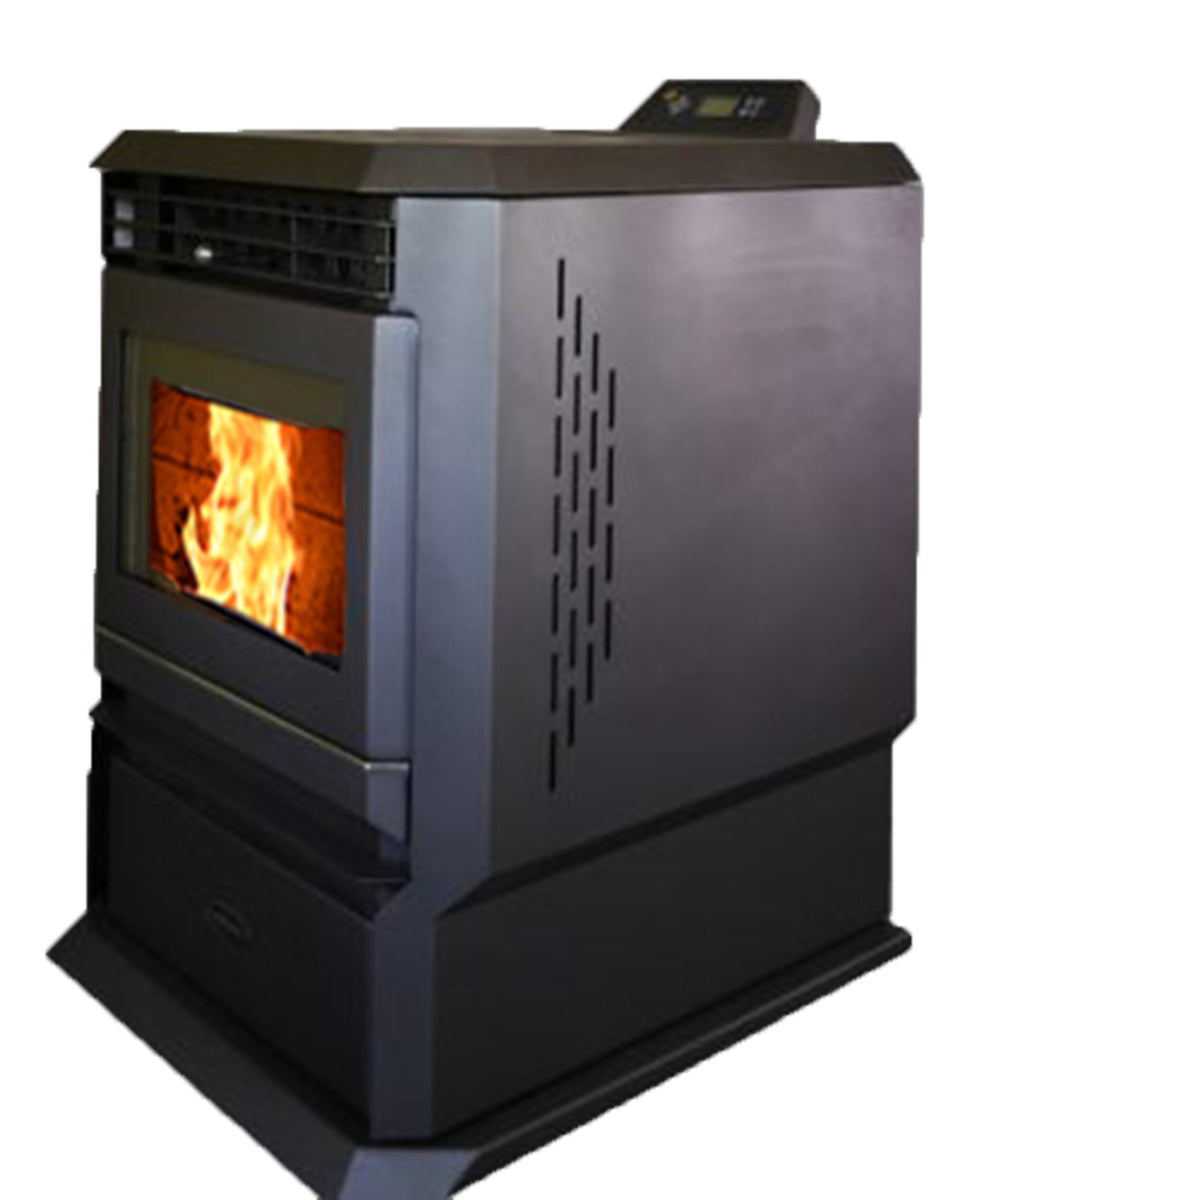 ComfortBilt HP61 3,000 sq. ft. EPA Certified Pellet Stove with Auto Ignition 51lb Hopper Capacity New